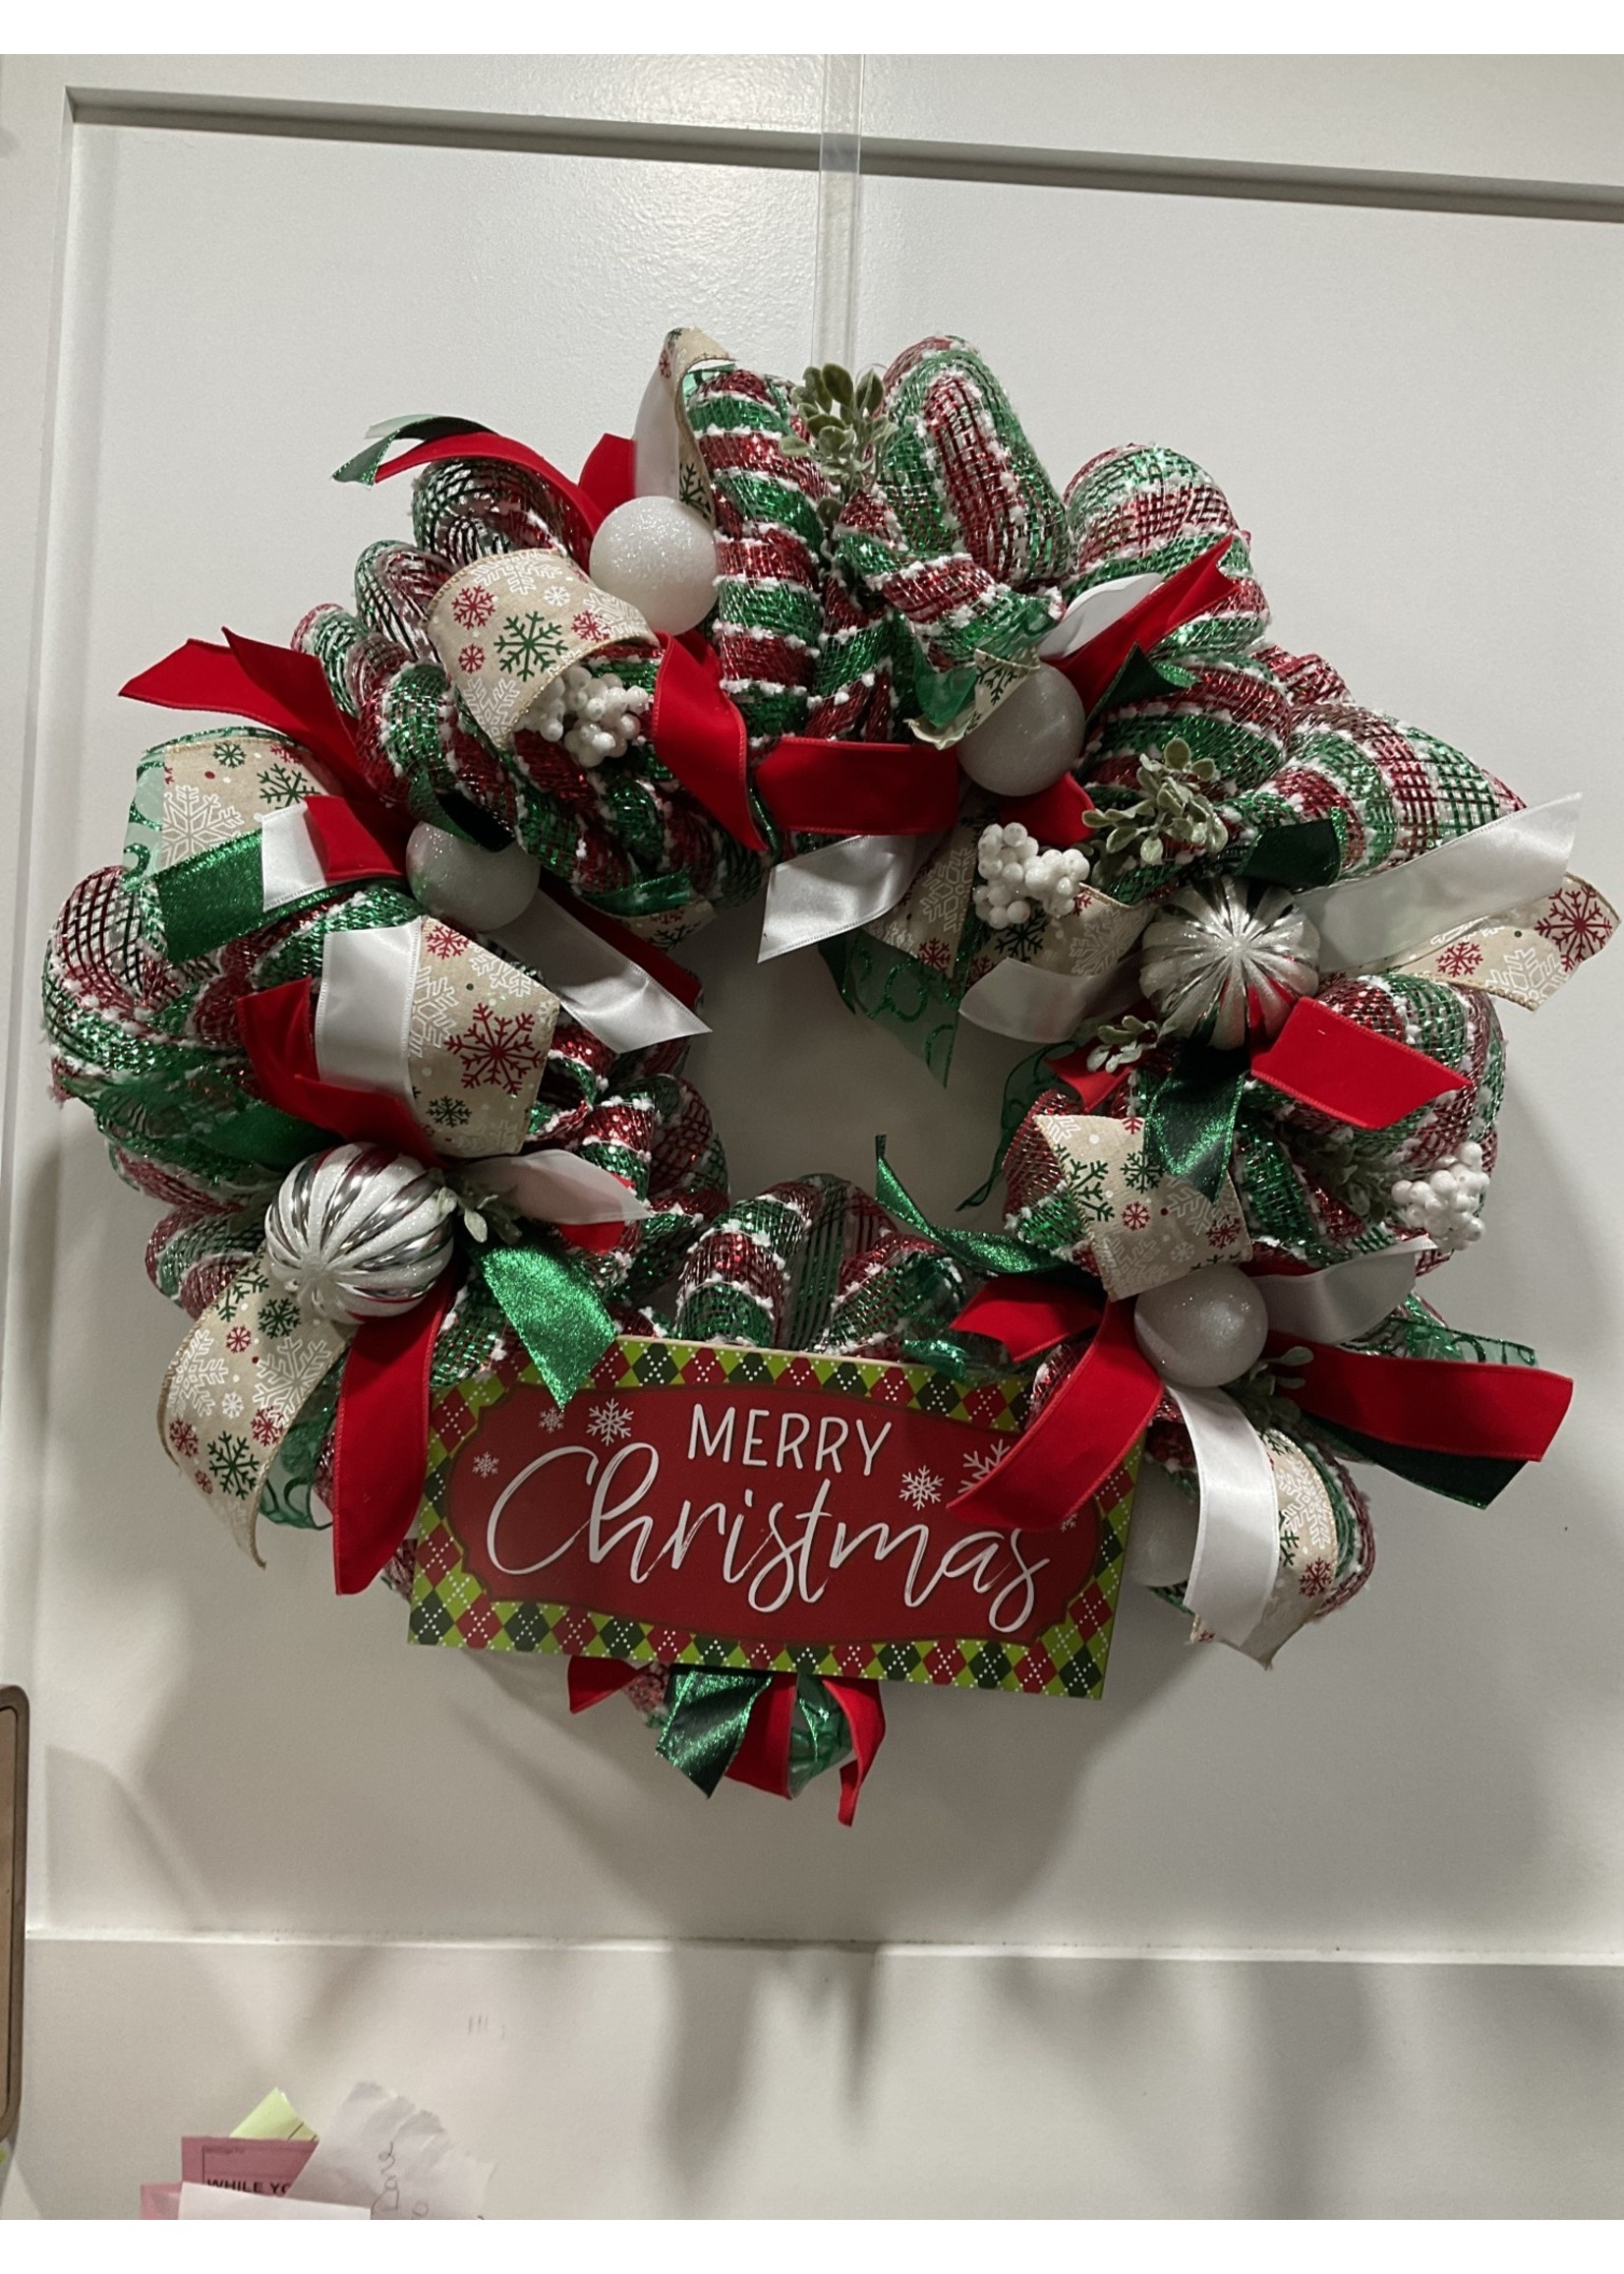 My New Favorite Thing Wreath Mesh "Merry Christmas" with Red and Green Snowflake Ribbon